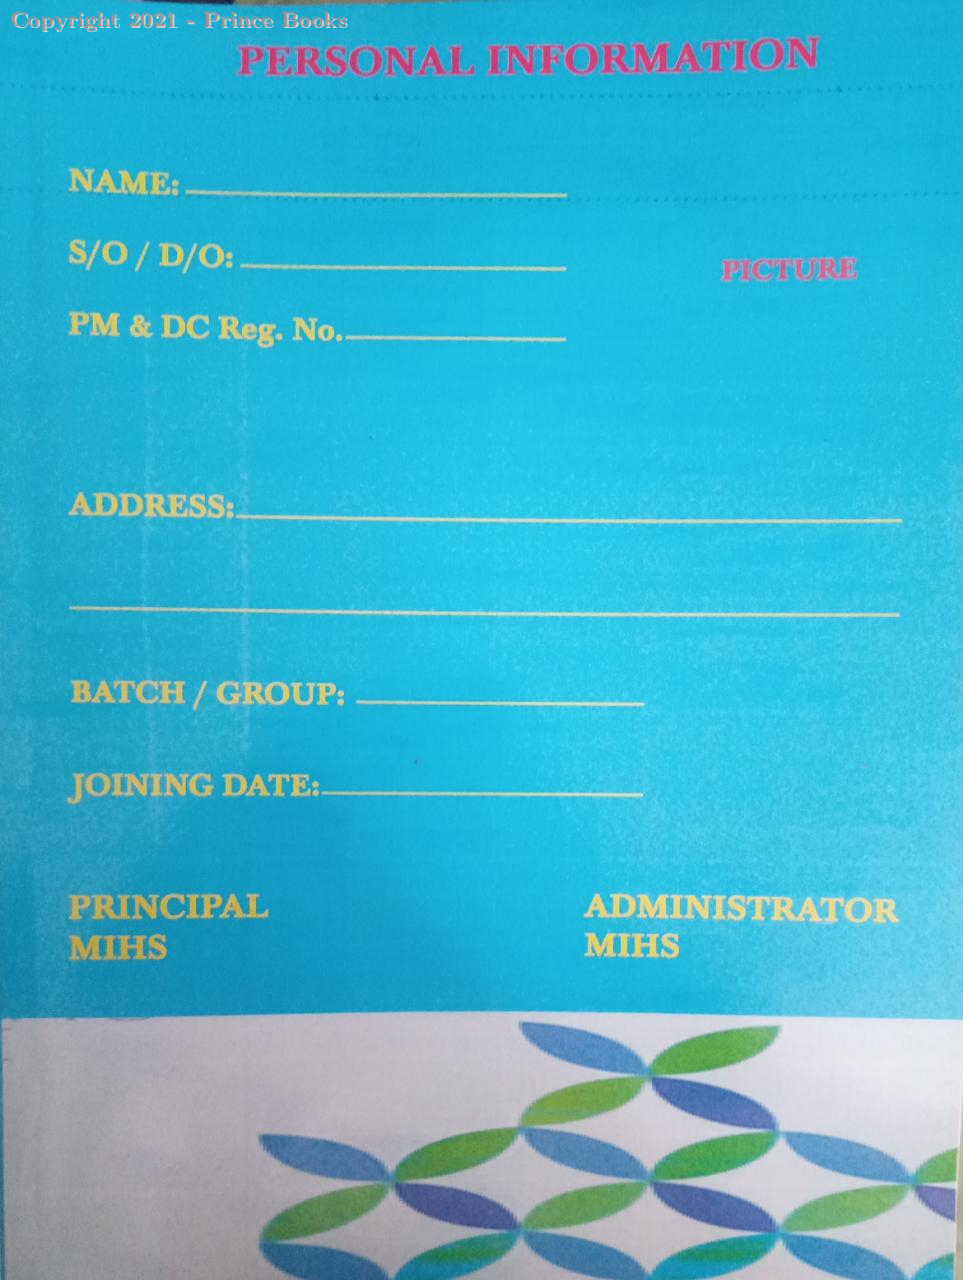 house job logbook (personal information)